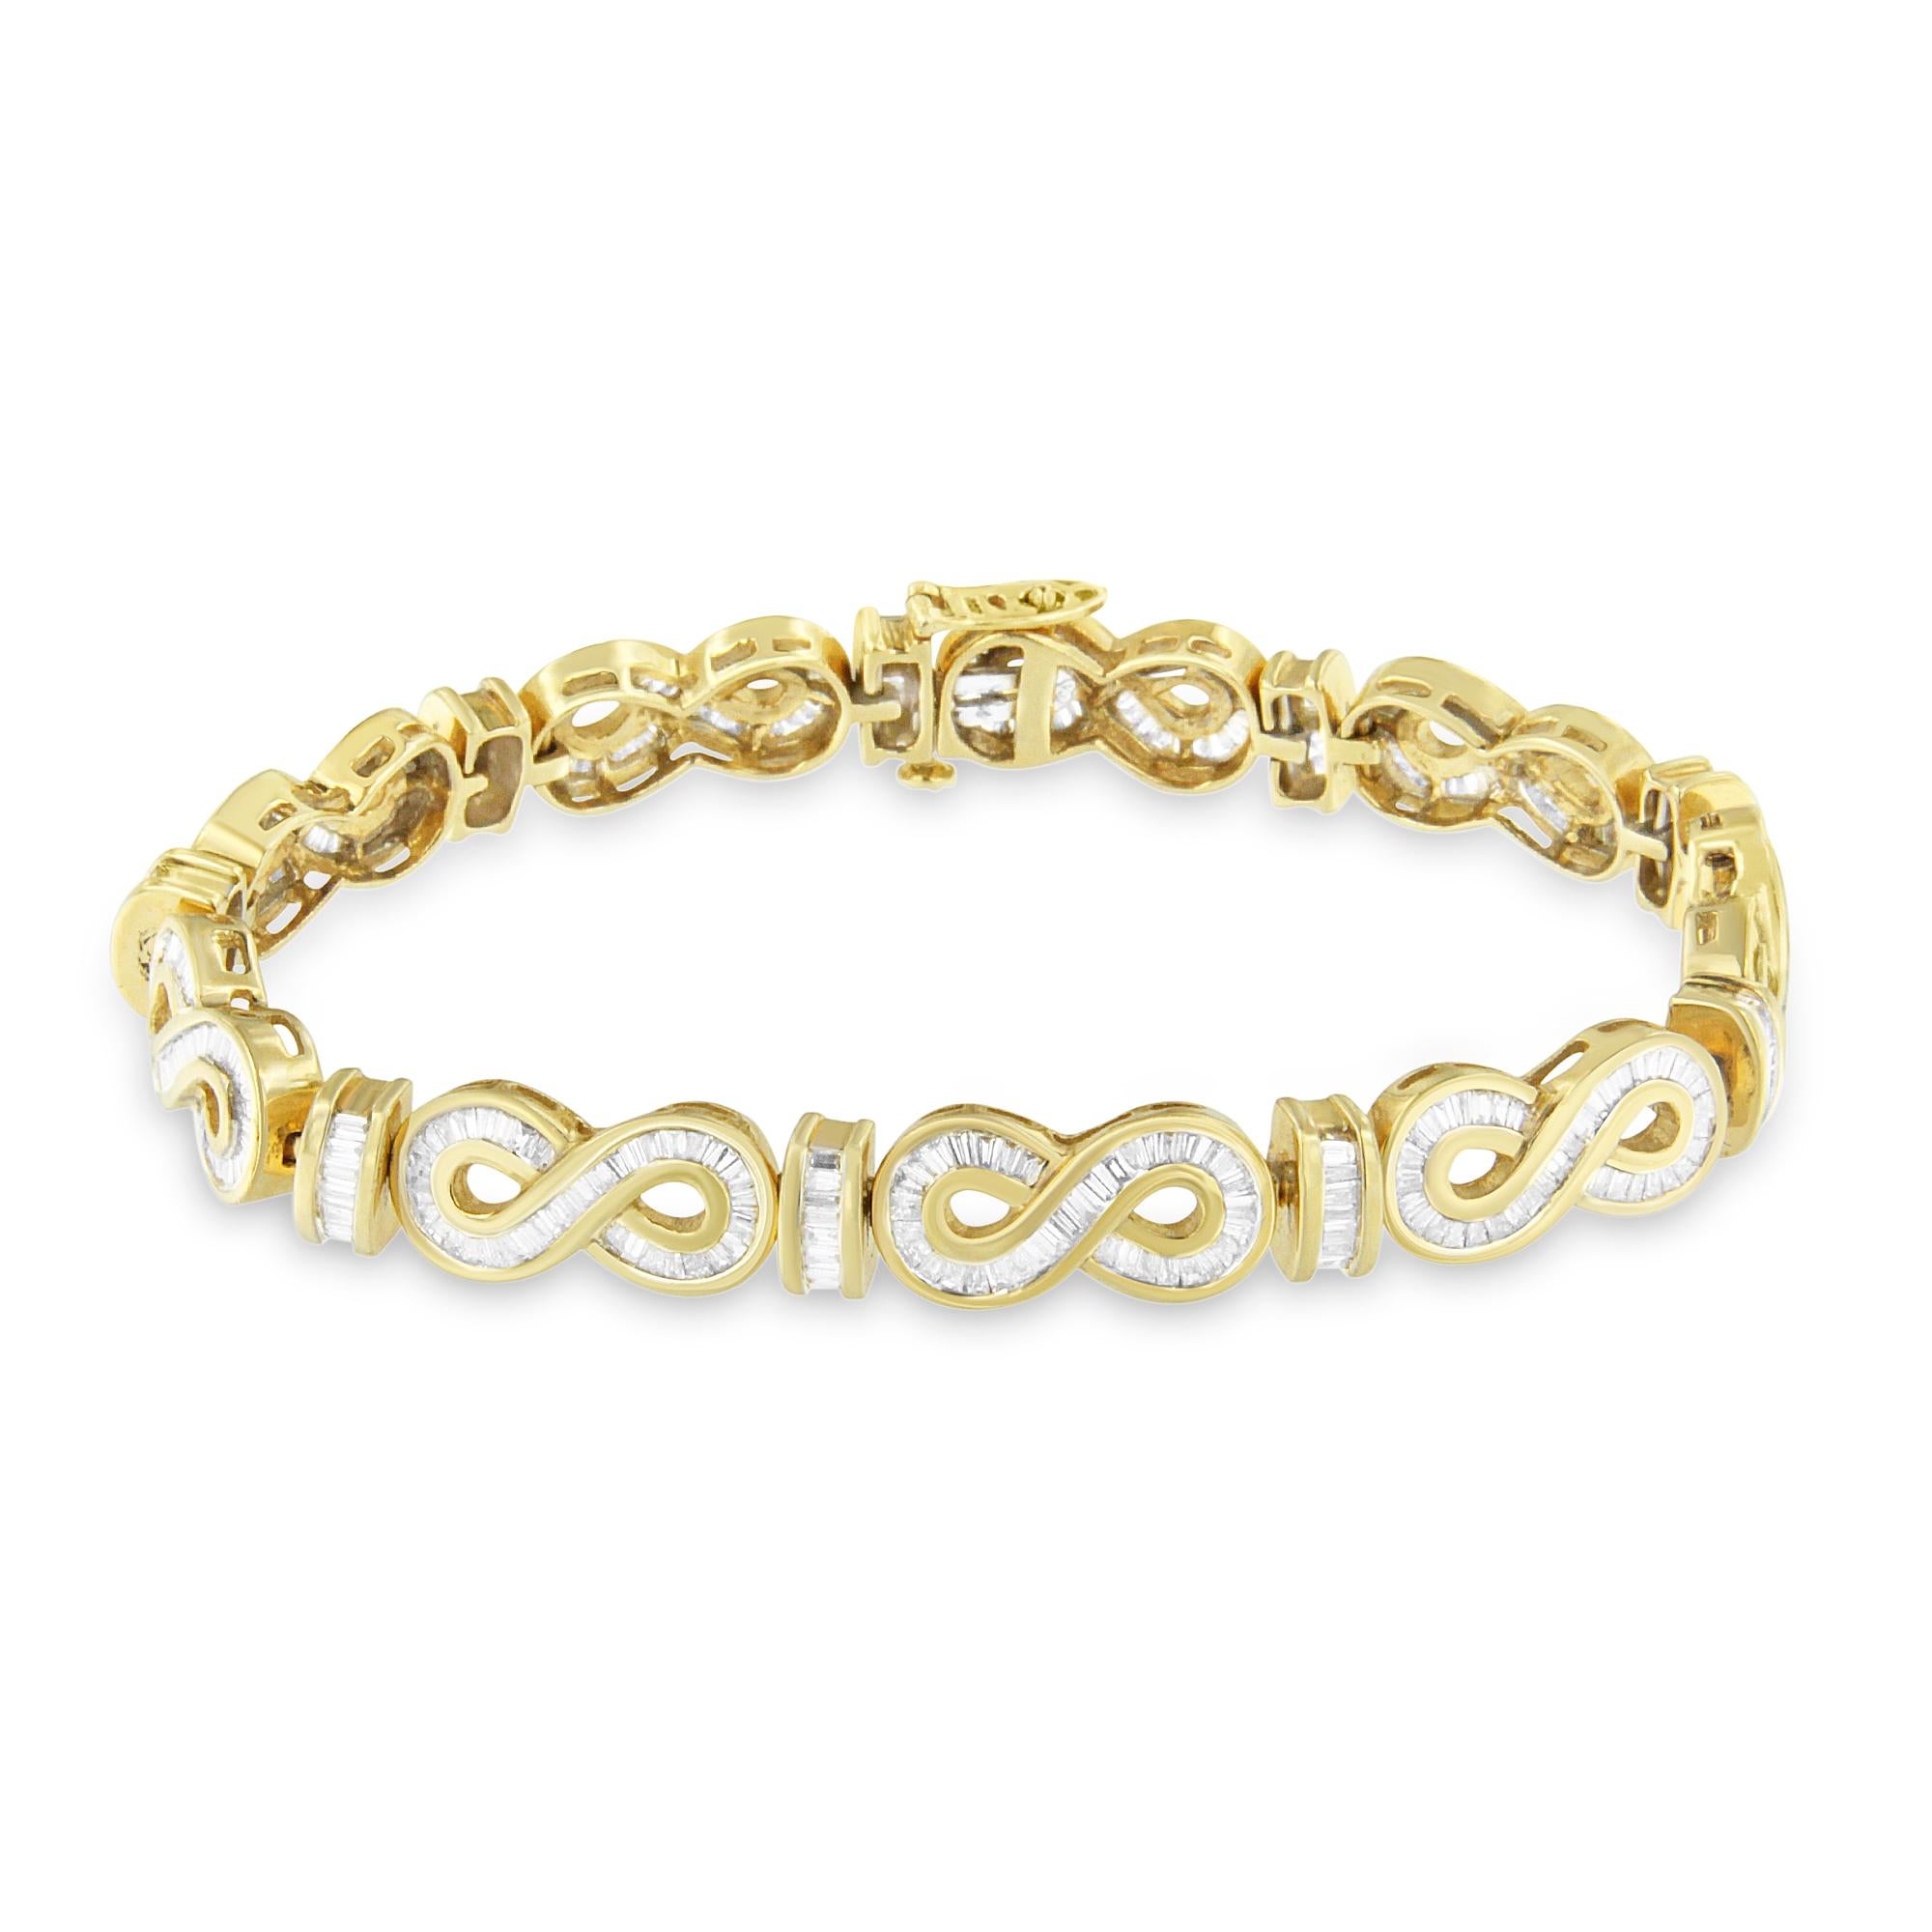 Represent both loving commitment and friendship for your partner by giving this stunning tennis diamond bracelet. Chisel to excellence, this two-toned bracelet is crafted of 14 karats white and yellow gold in tennis style. Further, the embellishment